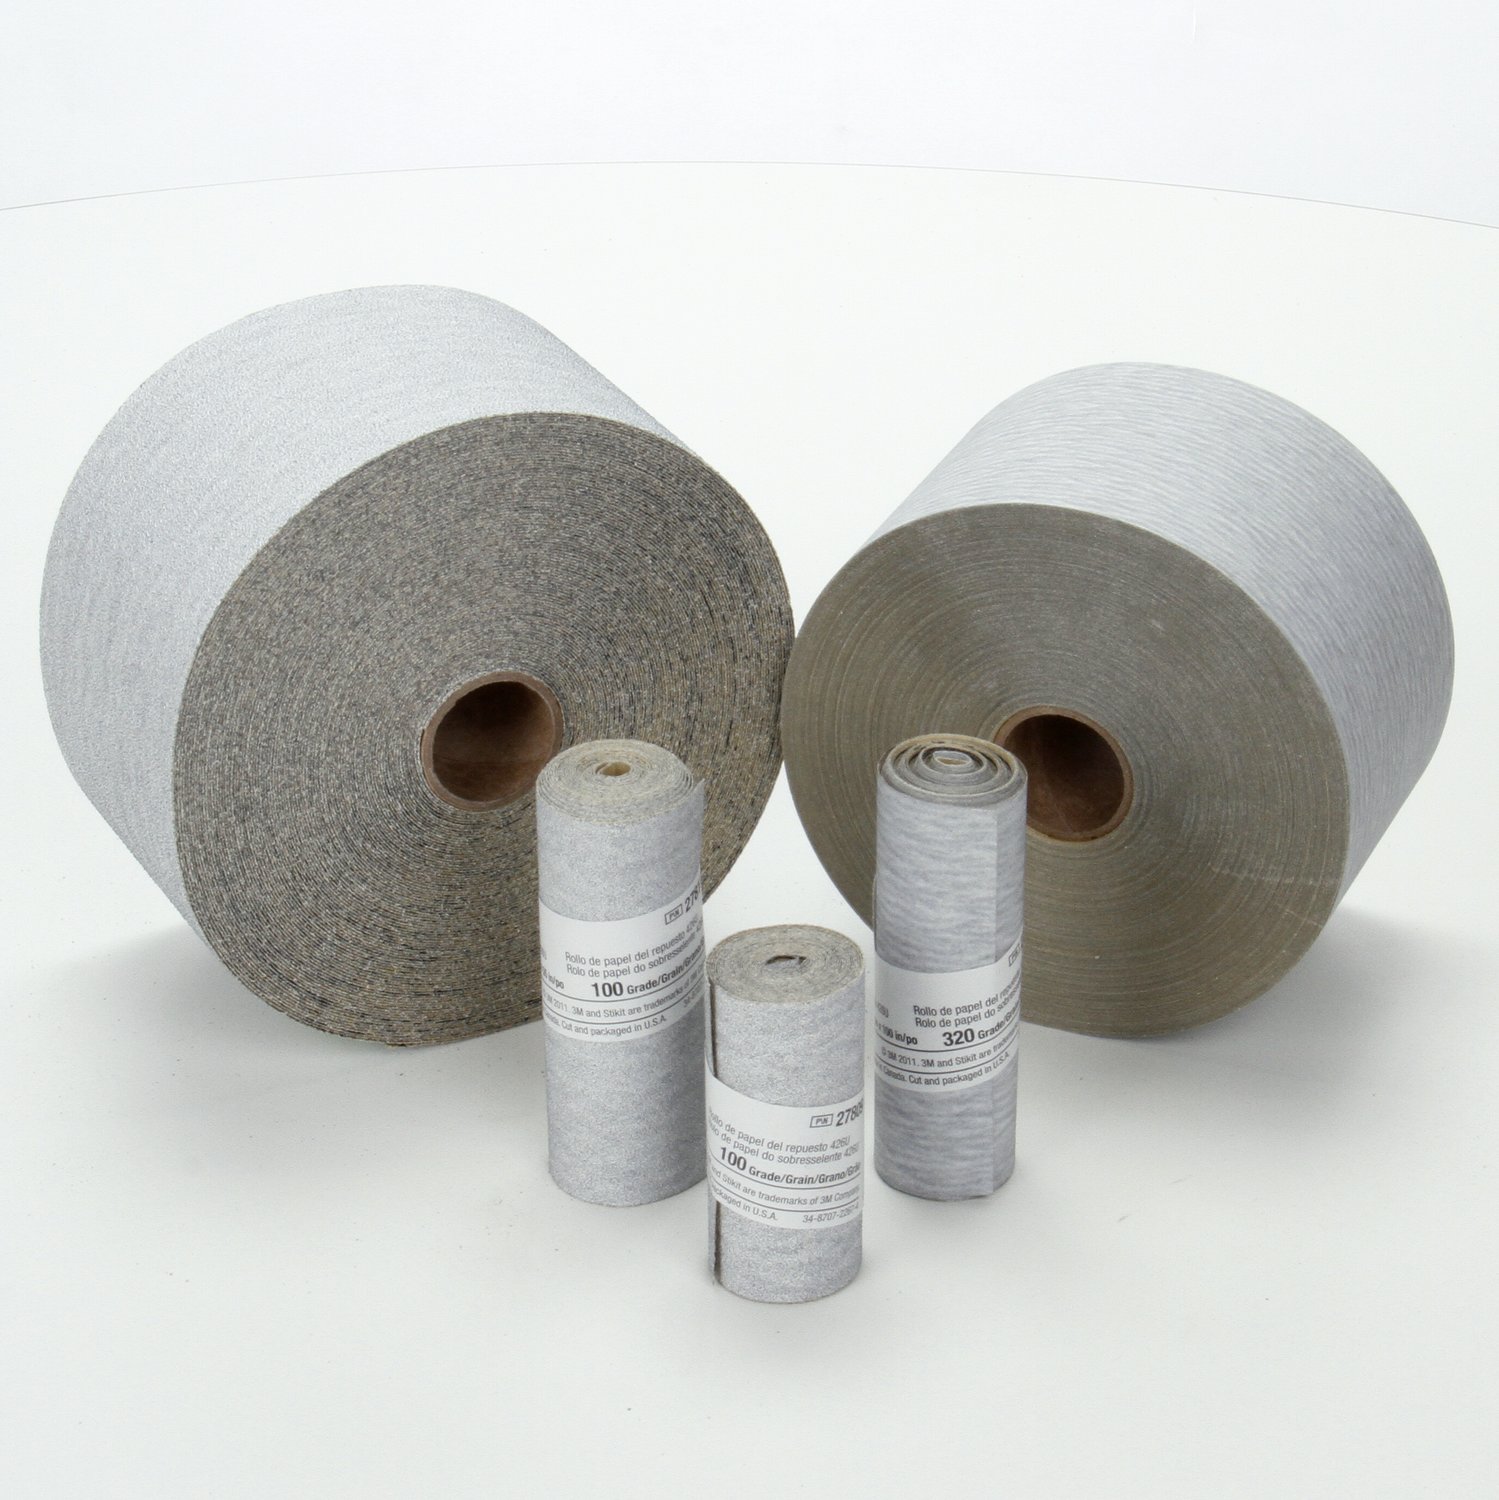 7100070160 - 3M Stikit Paper Roll 426U, 120 A-weight, Config